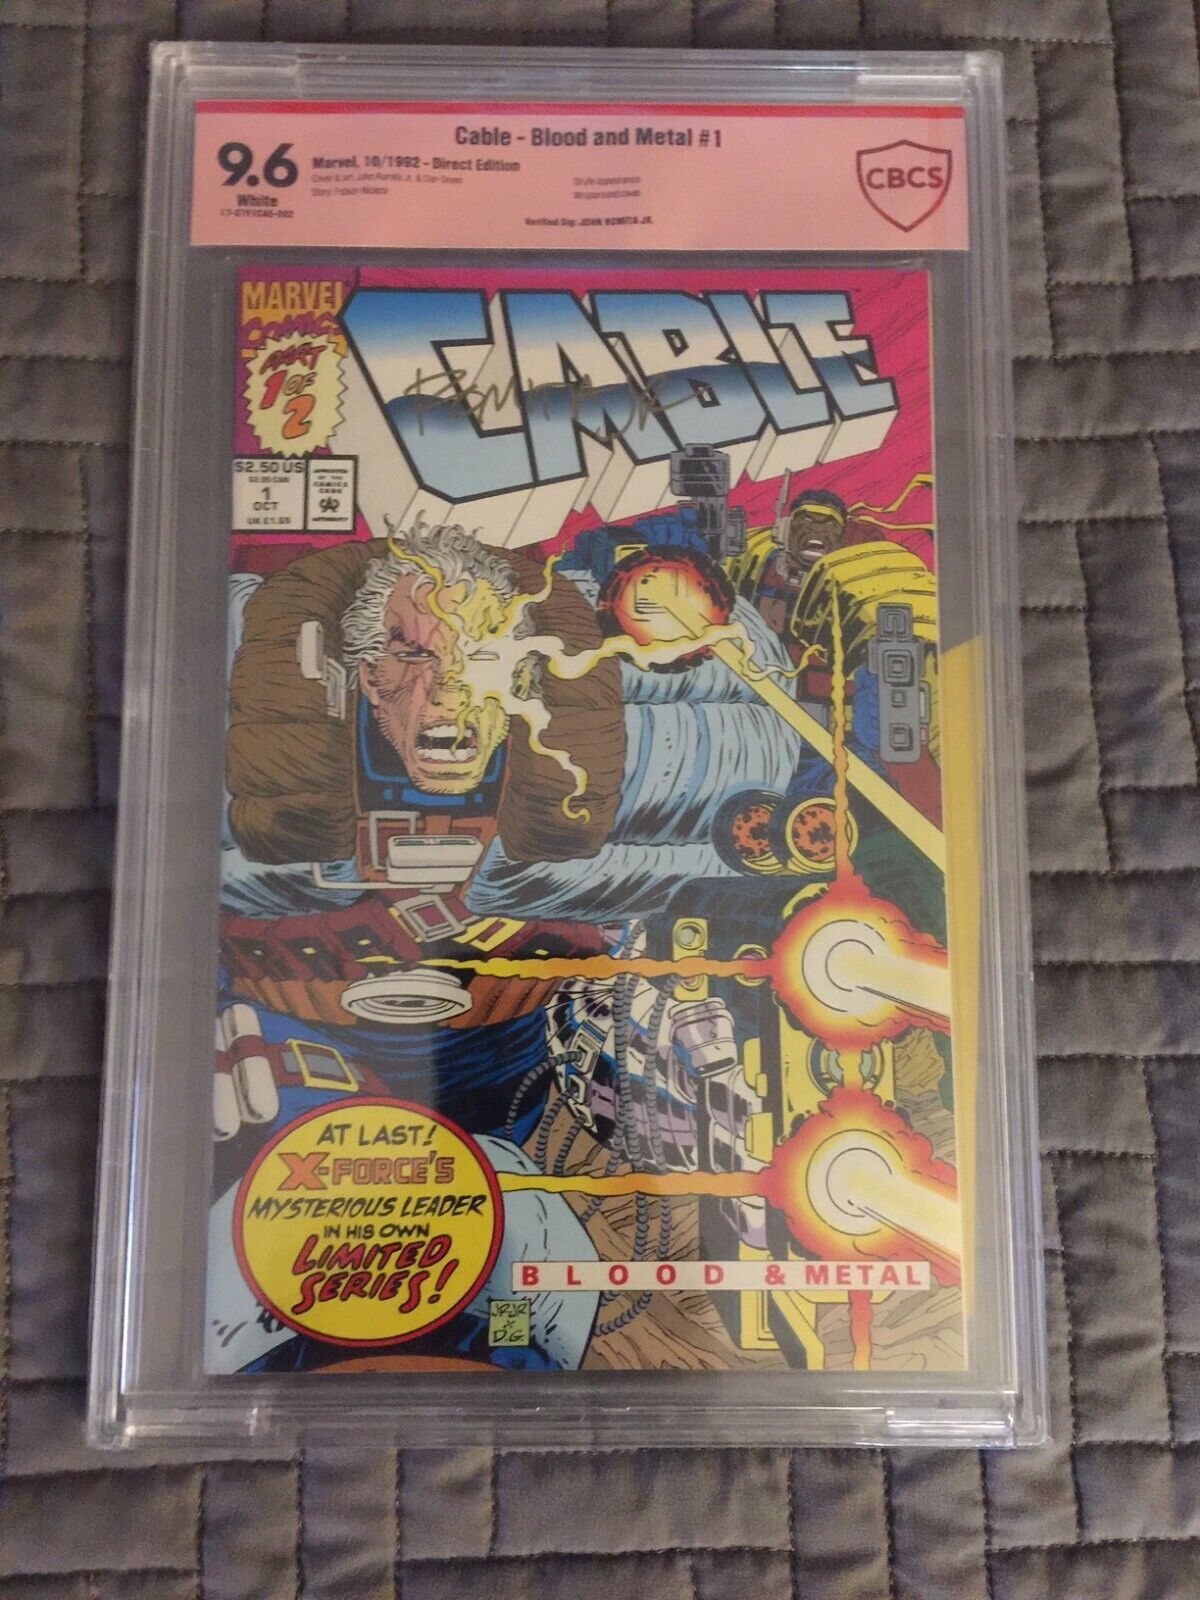 Cable-Blood and Metal #1 CBCS 9.6 signed by John Romita, JR. #391 fo 2500 HTF